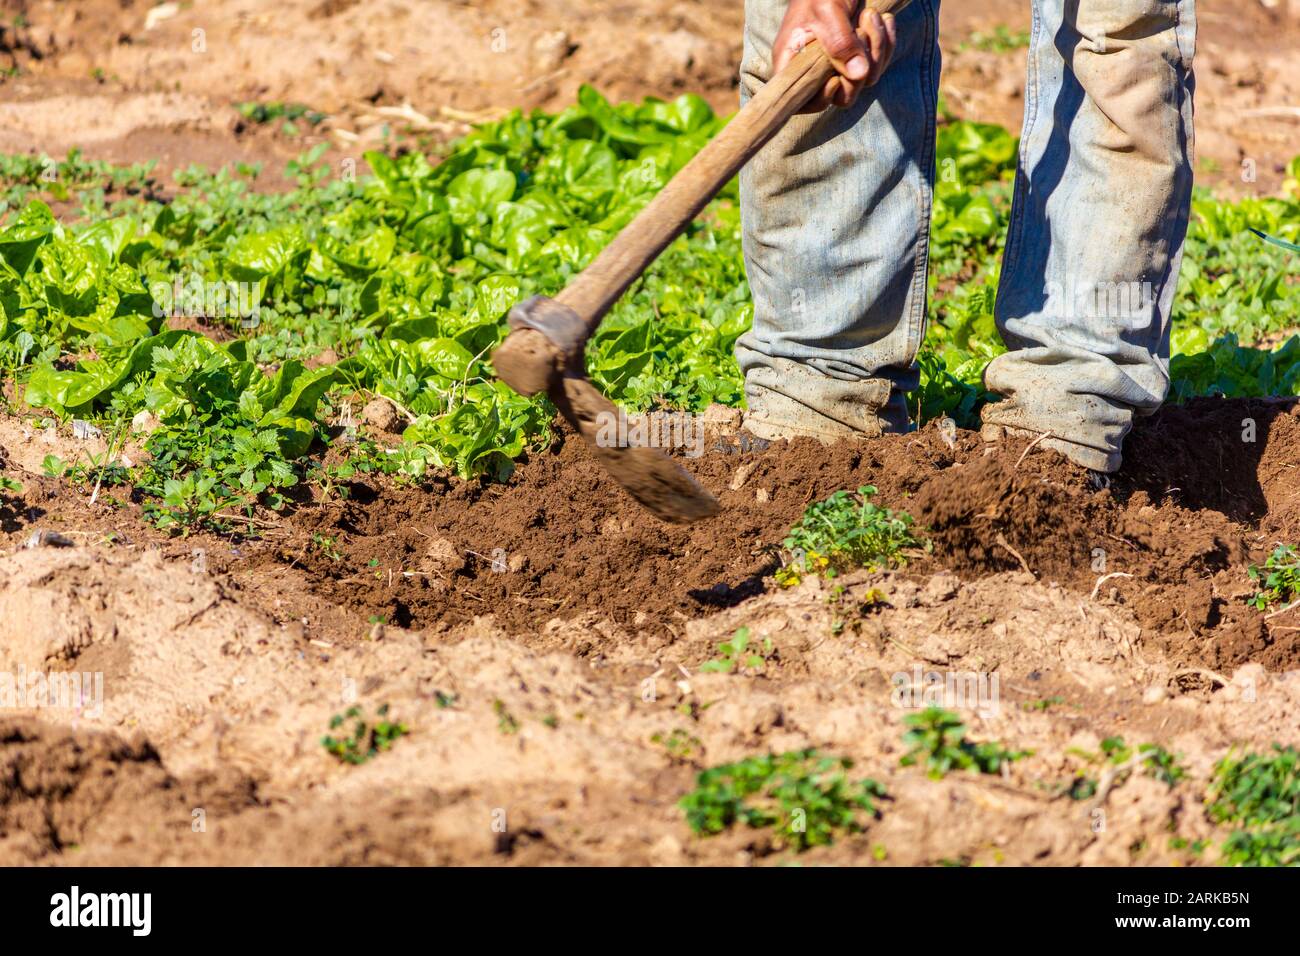 Working the soil in the garden, before planting more lettuce. Stock Photo